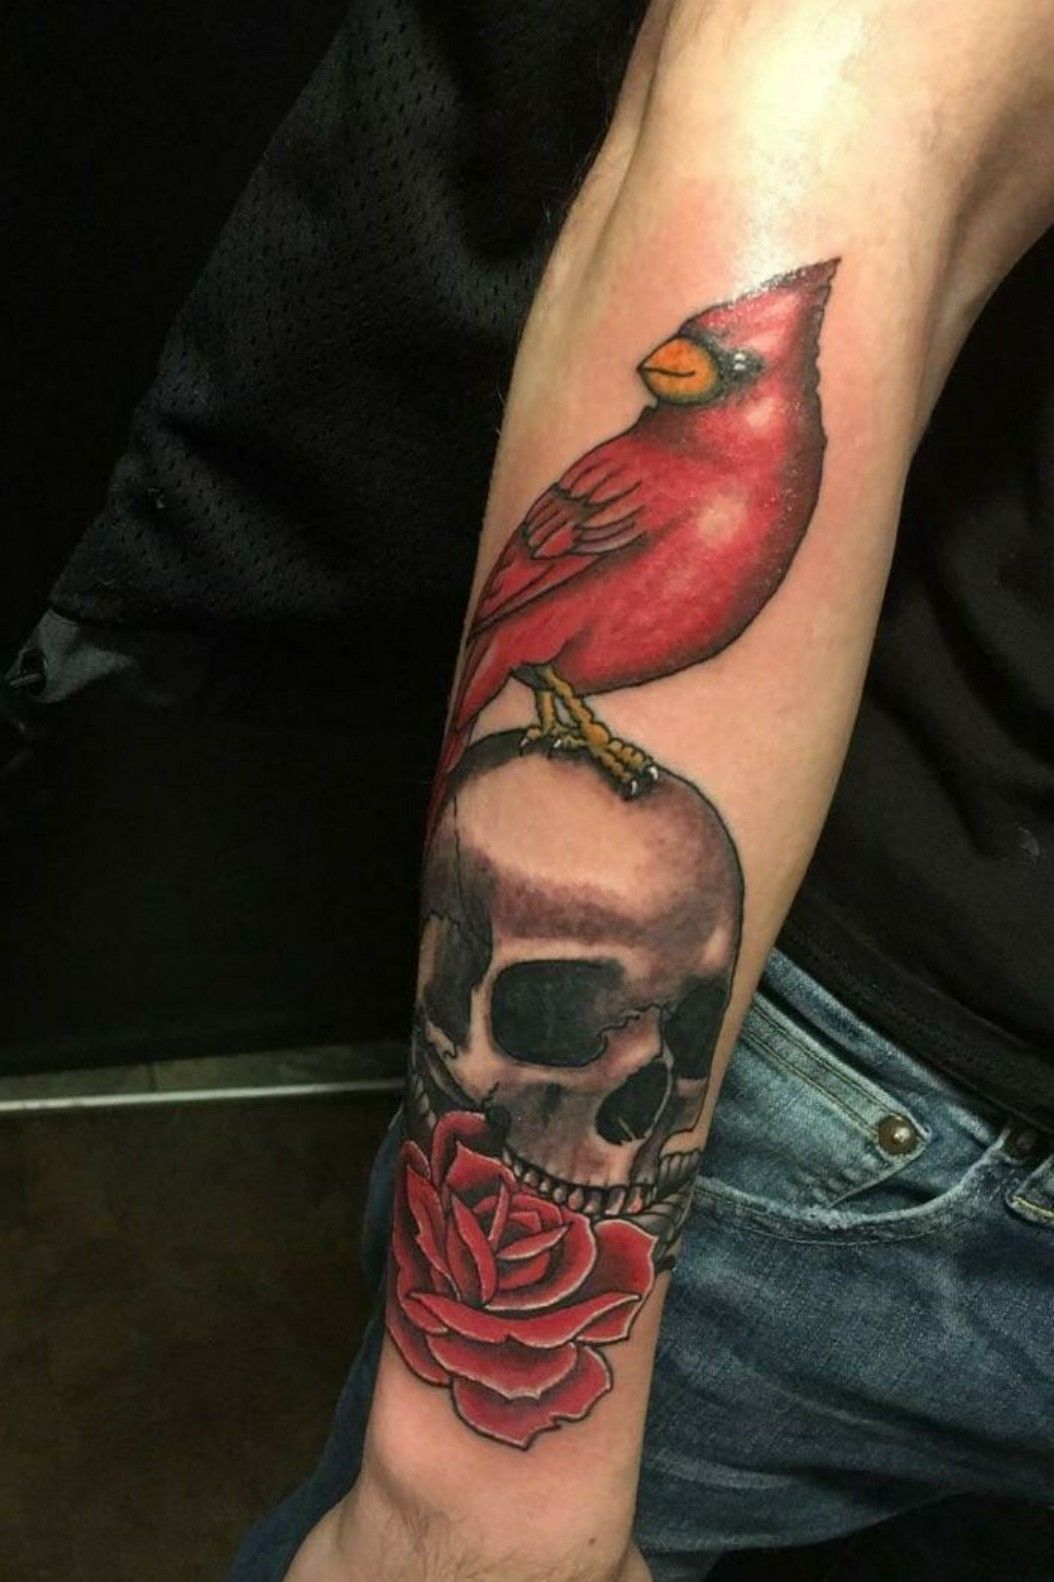 American Traditional Cardinal done by Douglas Grady at No Idols Tattoo in  NYC  rtattoos